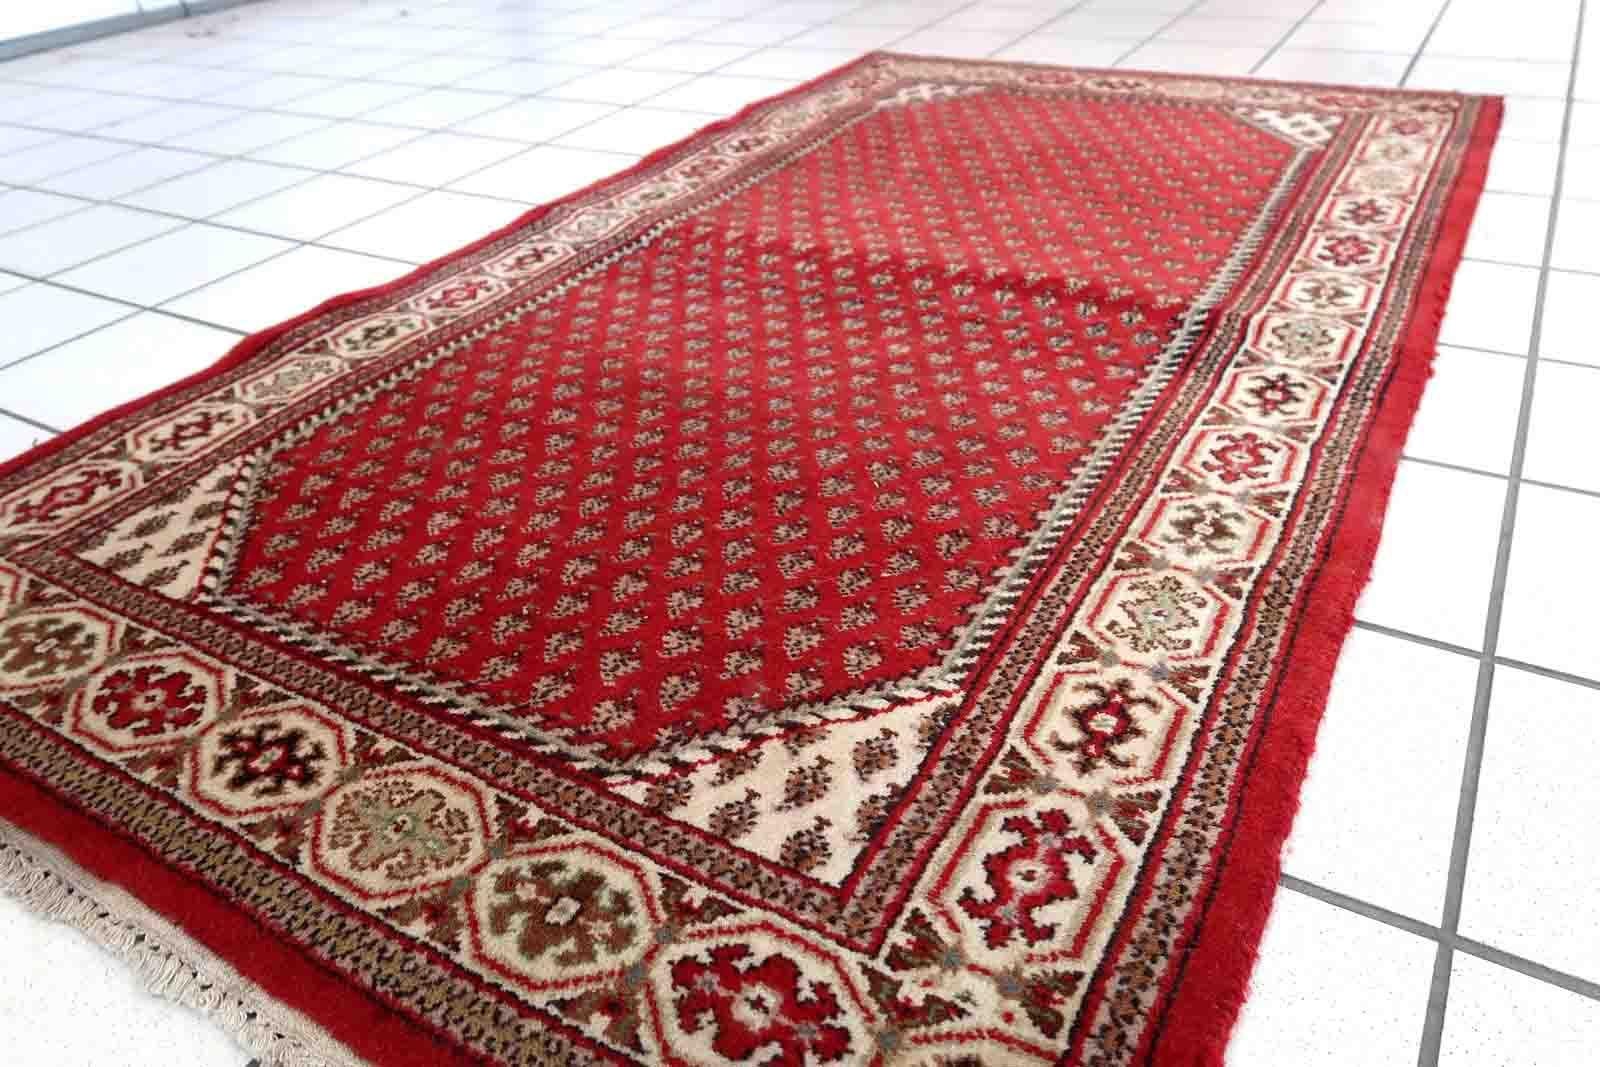 Handmade vintage Indian Seraband rug in red color and all-over design. The rug has been made in the end of 20th century. It is in original good condition.

-condition: original good,

-circa: 1970s,

-size: 3' x 5.2' (92cm x